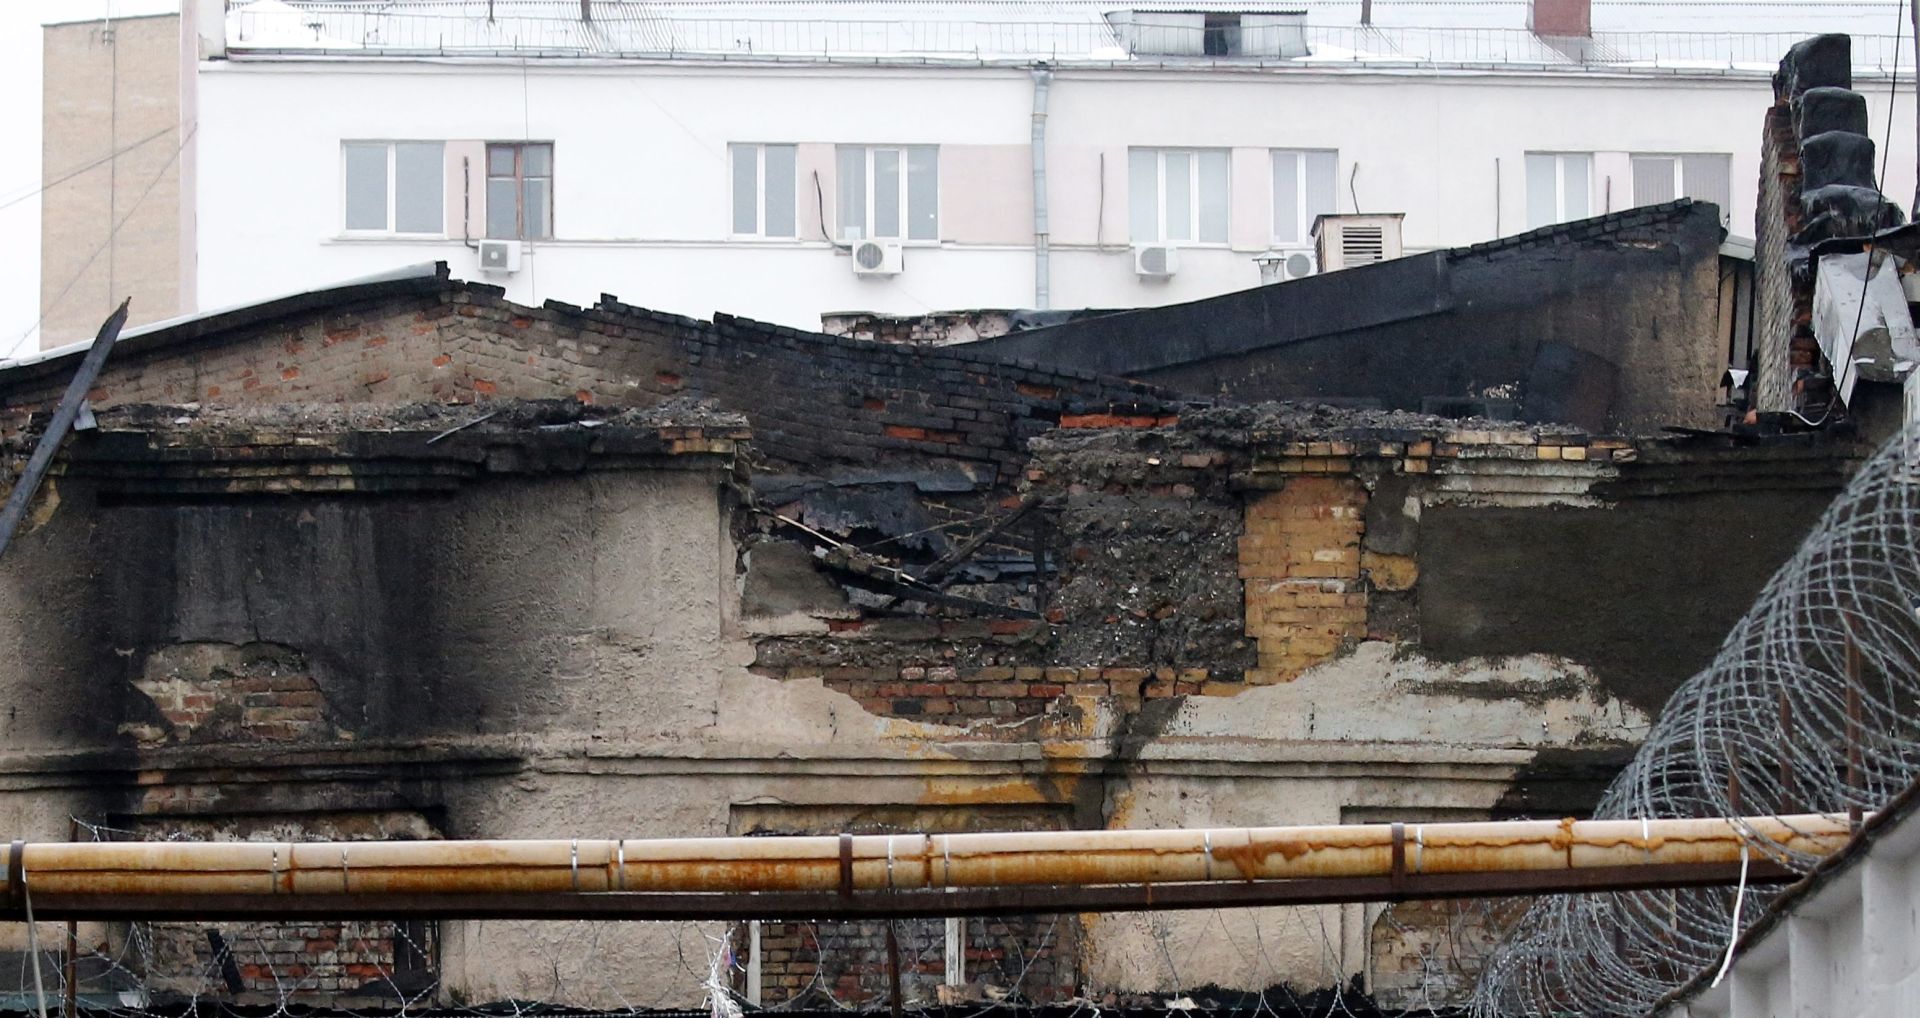 epa05137079 A collapsed scorched roof at the site of a fire at a sewing workshop in Stromynka Street in Moscow, Russia, 31 January 2016. At least 12 people were killed, including three children, after a fire swept through a sewing factory in north-eastern Moscow, authorities said. The blaze erupted late Saturday, damaging about 3,000 square meters of the building and causing a portion of the roof to collapse, Russian news agencies reported. A preliminary probe indicates the fire was caused by arson and a murder investigation has been launched, the TASS news agency reported, citing anonymous law enforcement officials.  EPA/MAXIM SHIPENKOV